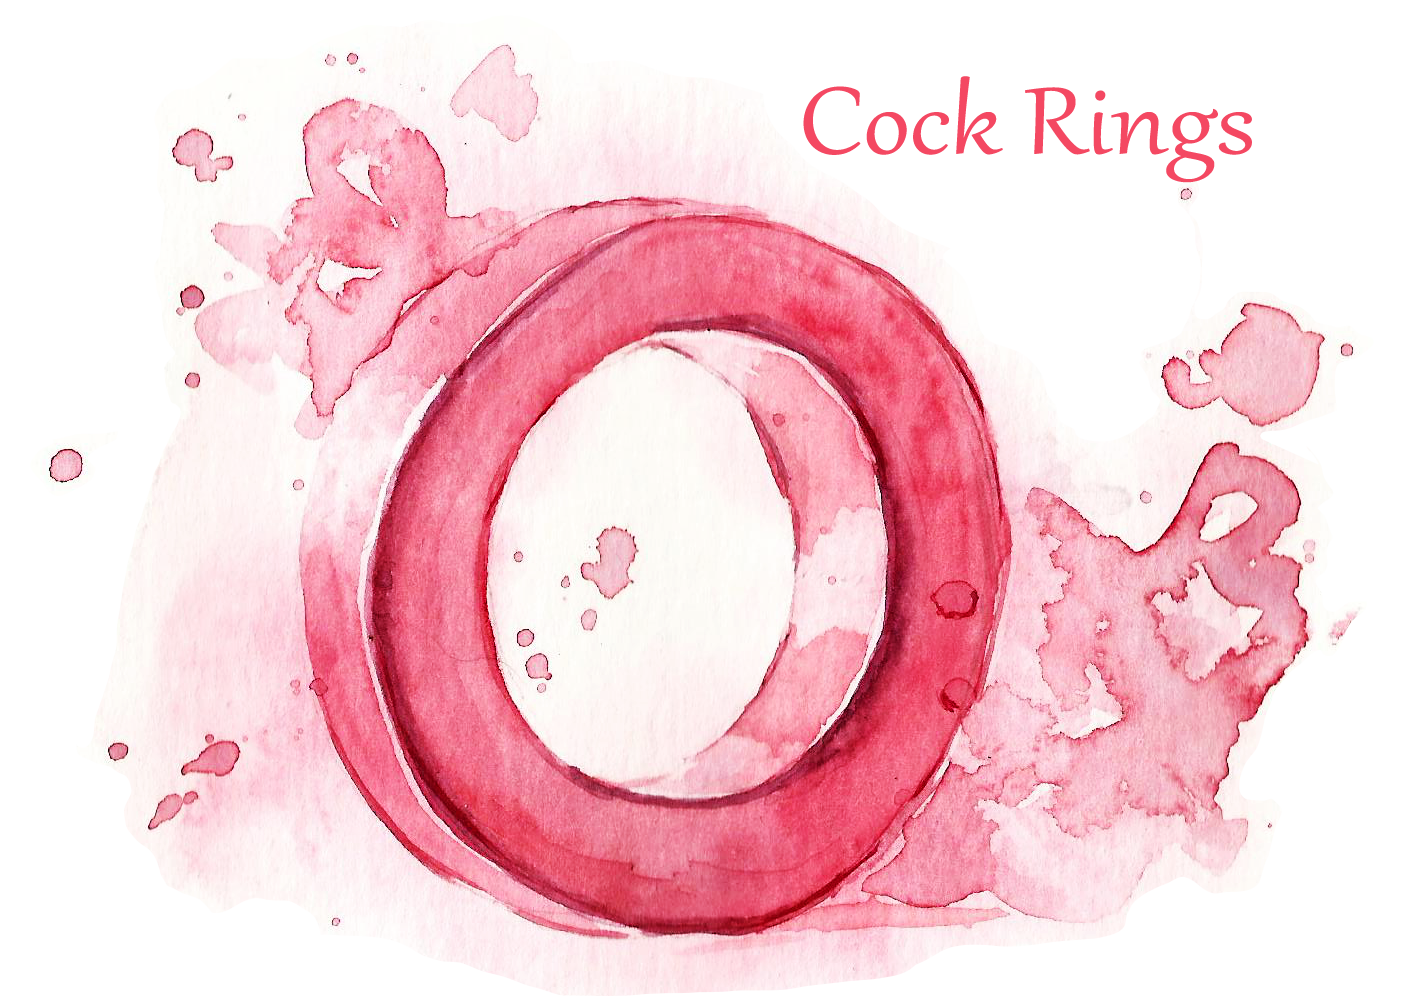 Achieve Explosive Orgasms with Cock Rings